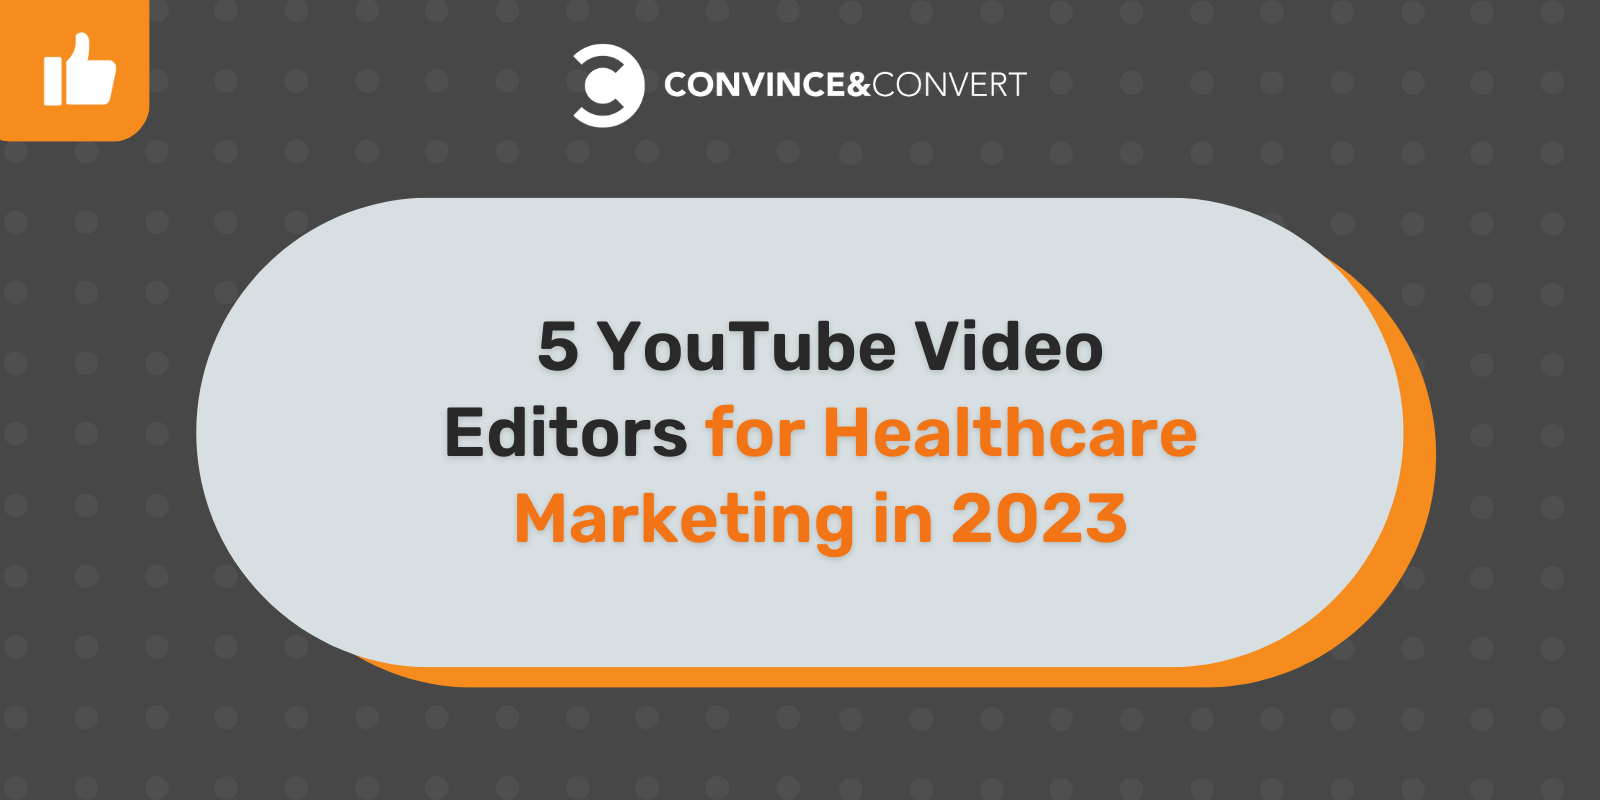 5 YouTube Video Editors for Healthcare Marketing in 2023